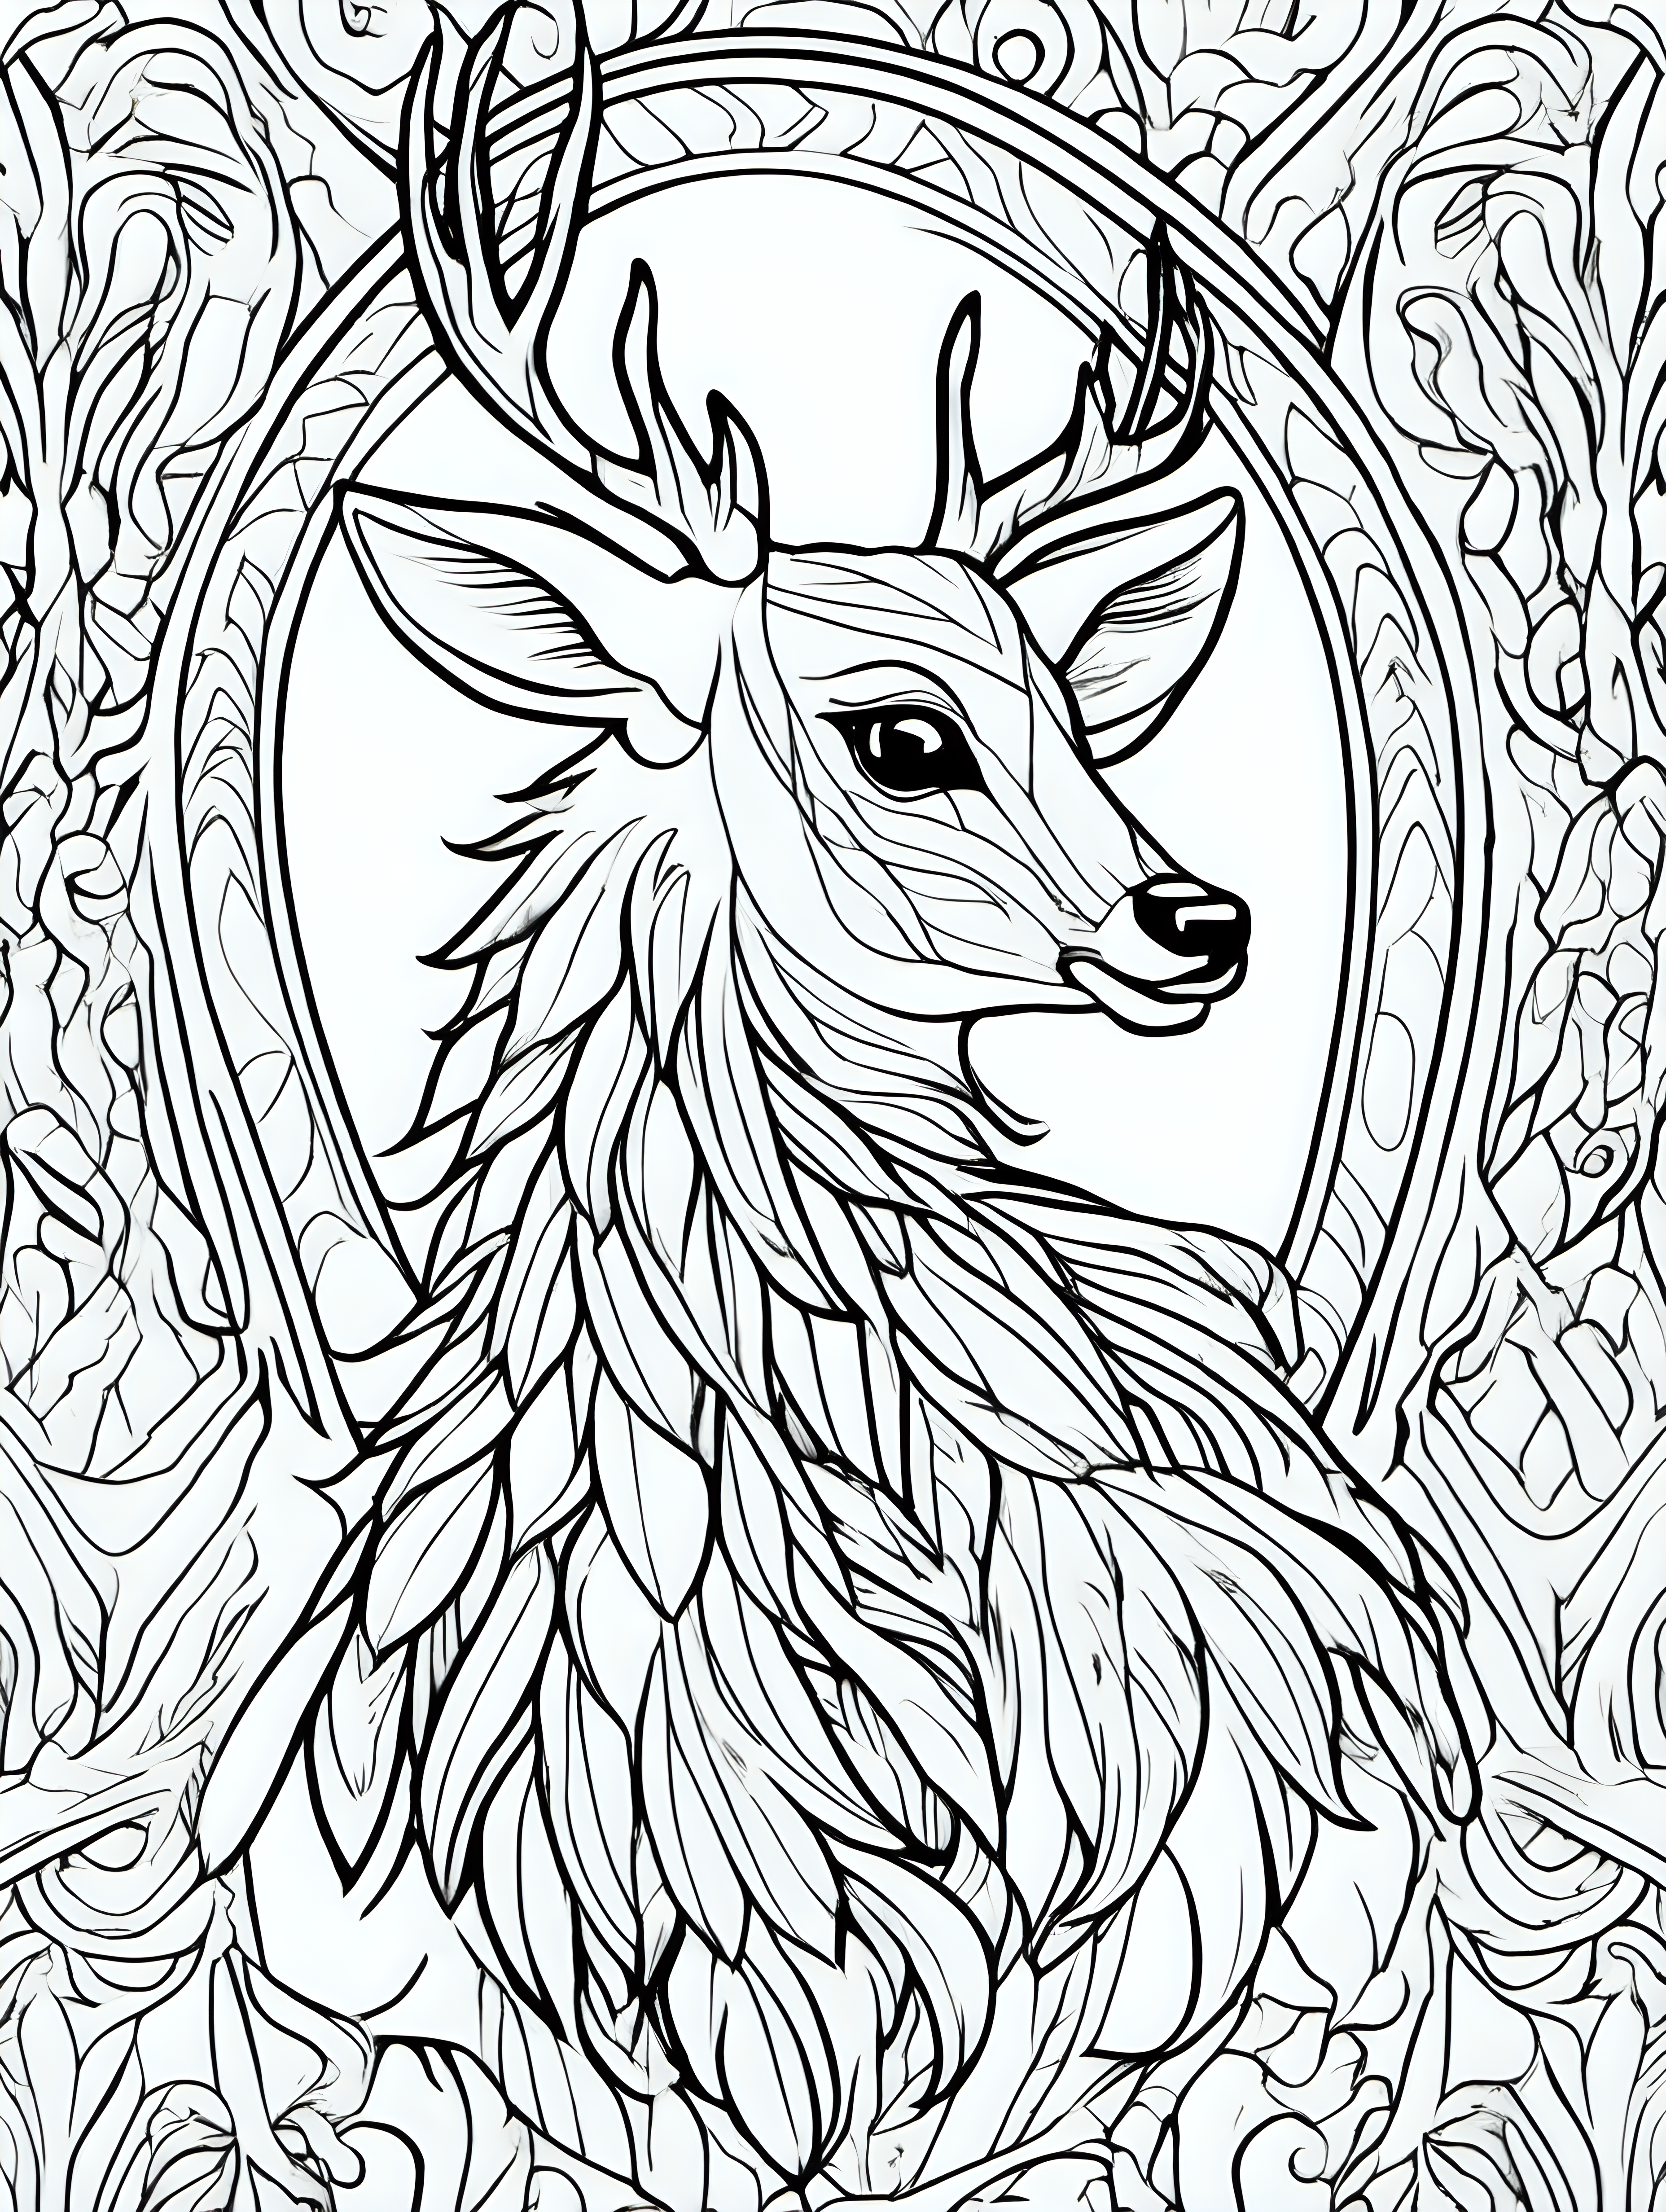 fawn feather patterns coloring page simple draw no